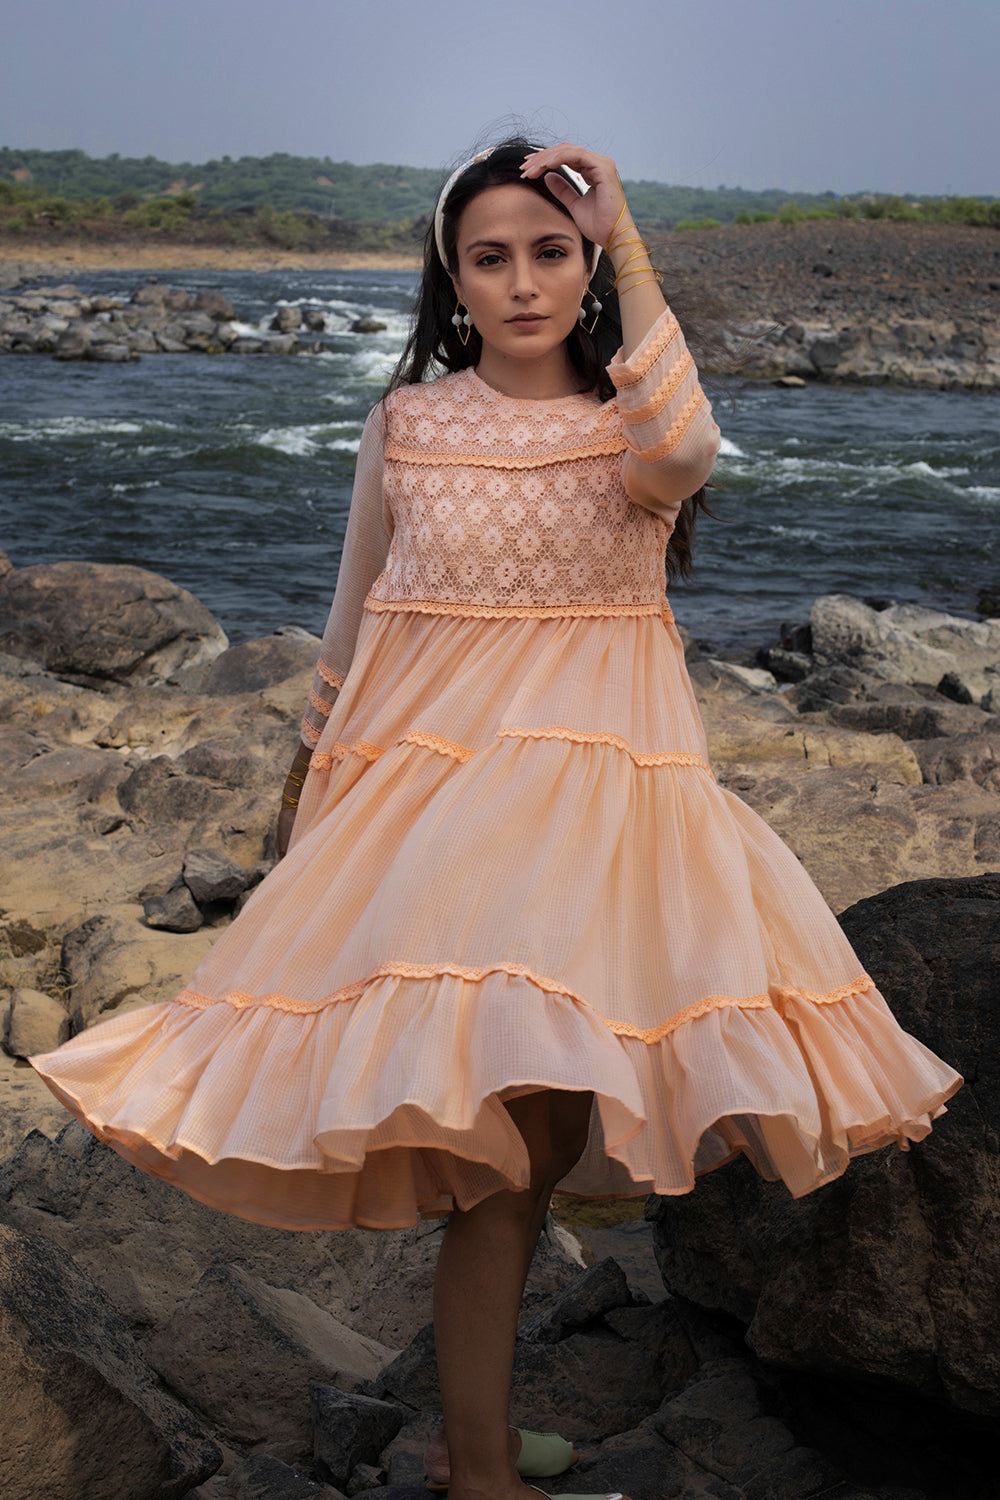 Peach Tiered Lace Dress